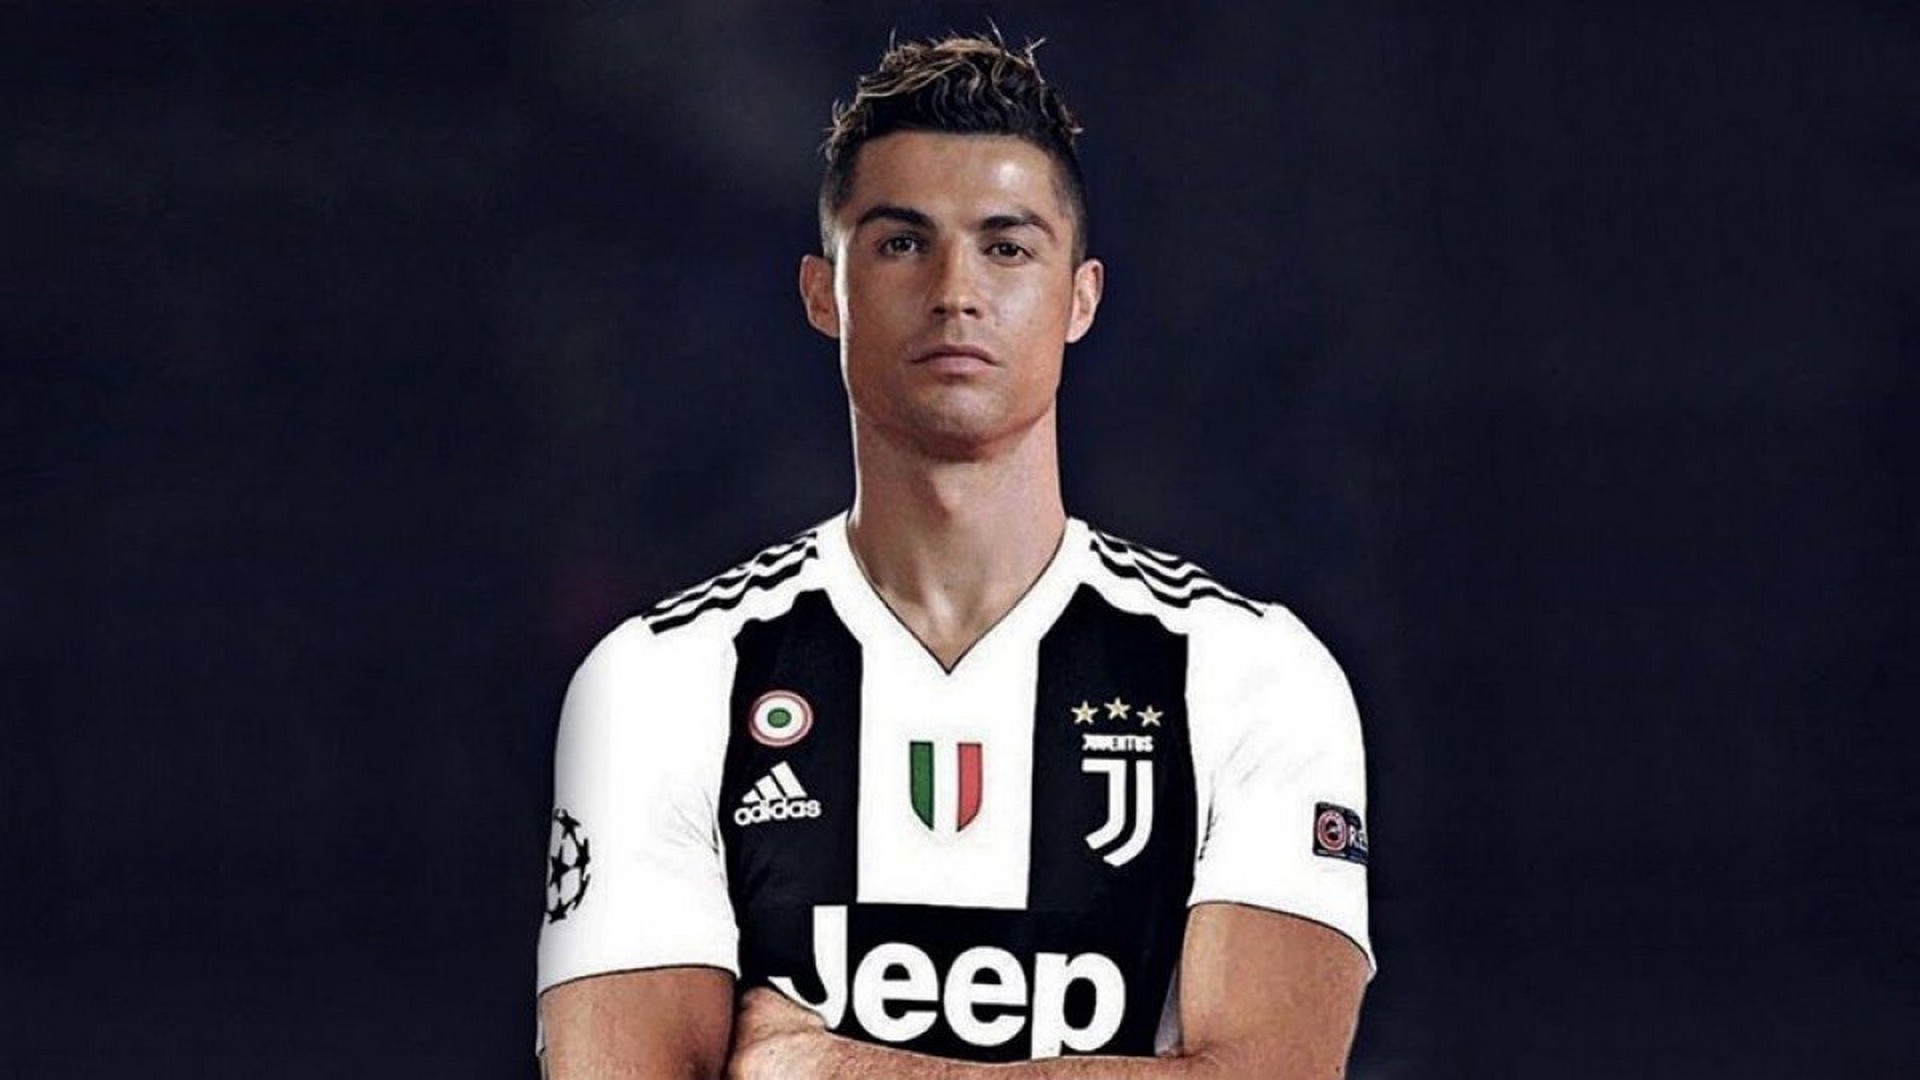 HD Wallpaper CR7 Juventus With Resolution 1920X1080 pixel. You can make this wallpaper for your Desktop Computer Backgrounds, Mac Wallpapers, Android Lock screen or iPhone Screensavers